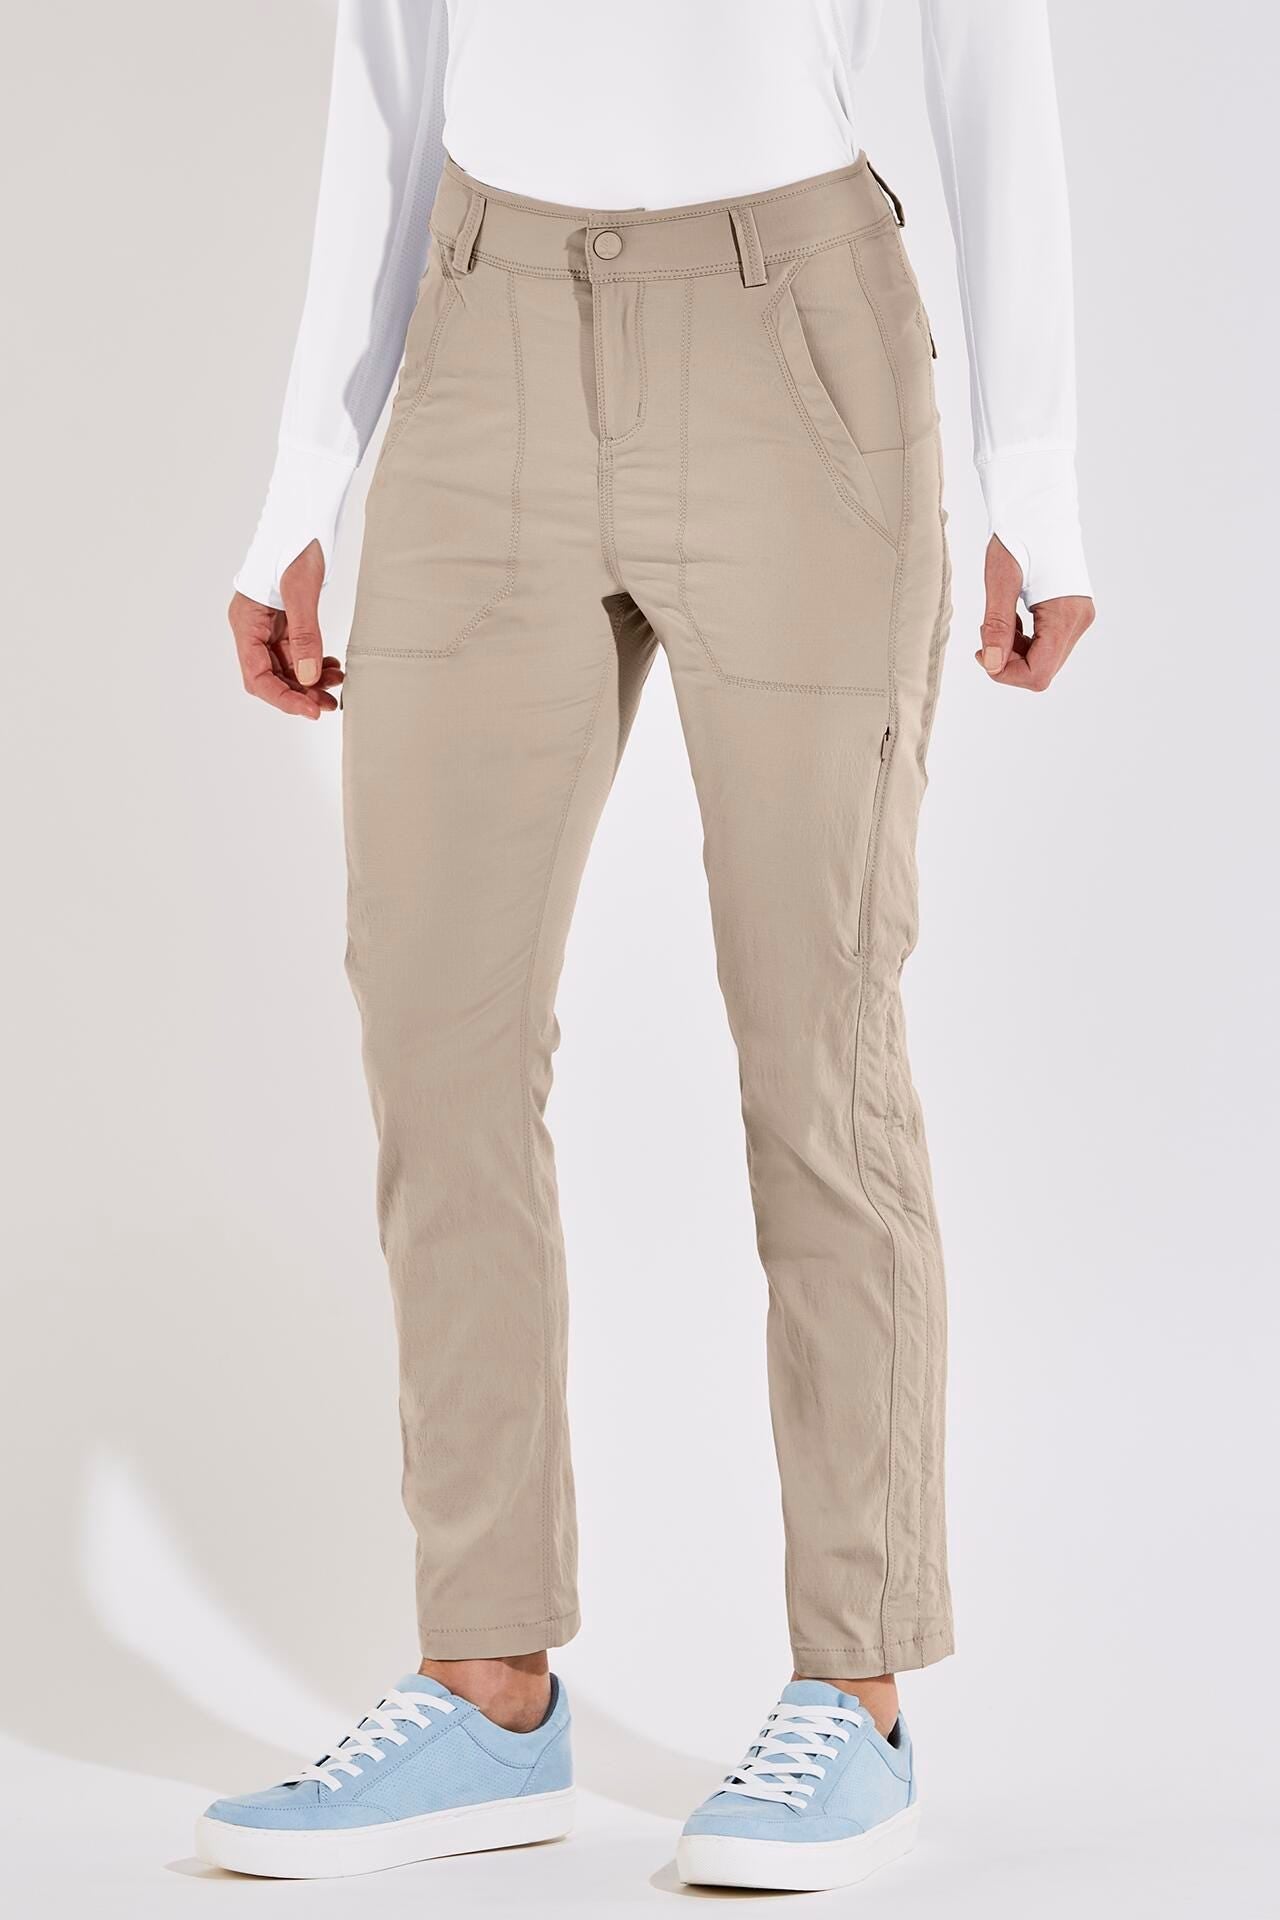 Graff Fishing Trousers 707-CL-2 With UPF 50 Sun Protection Grey